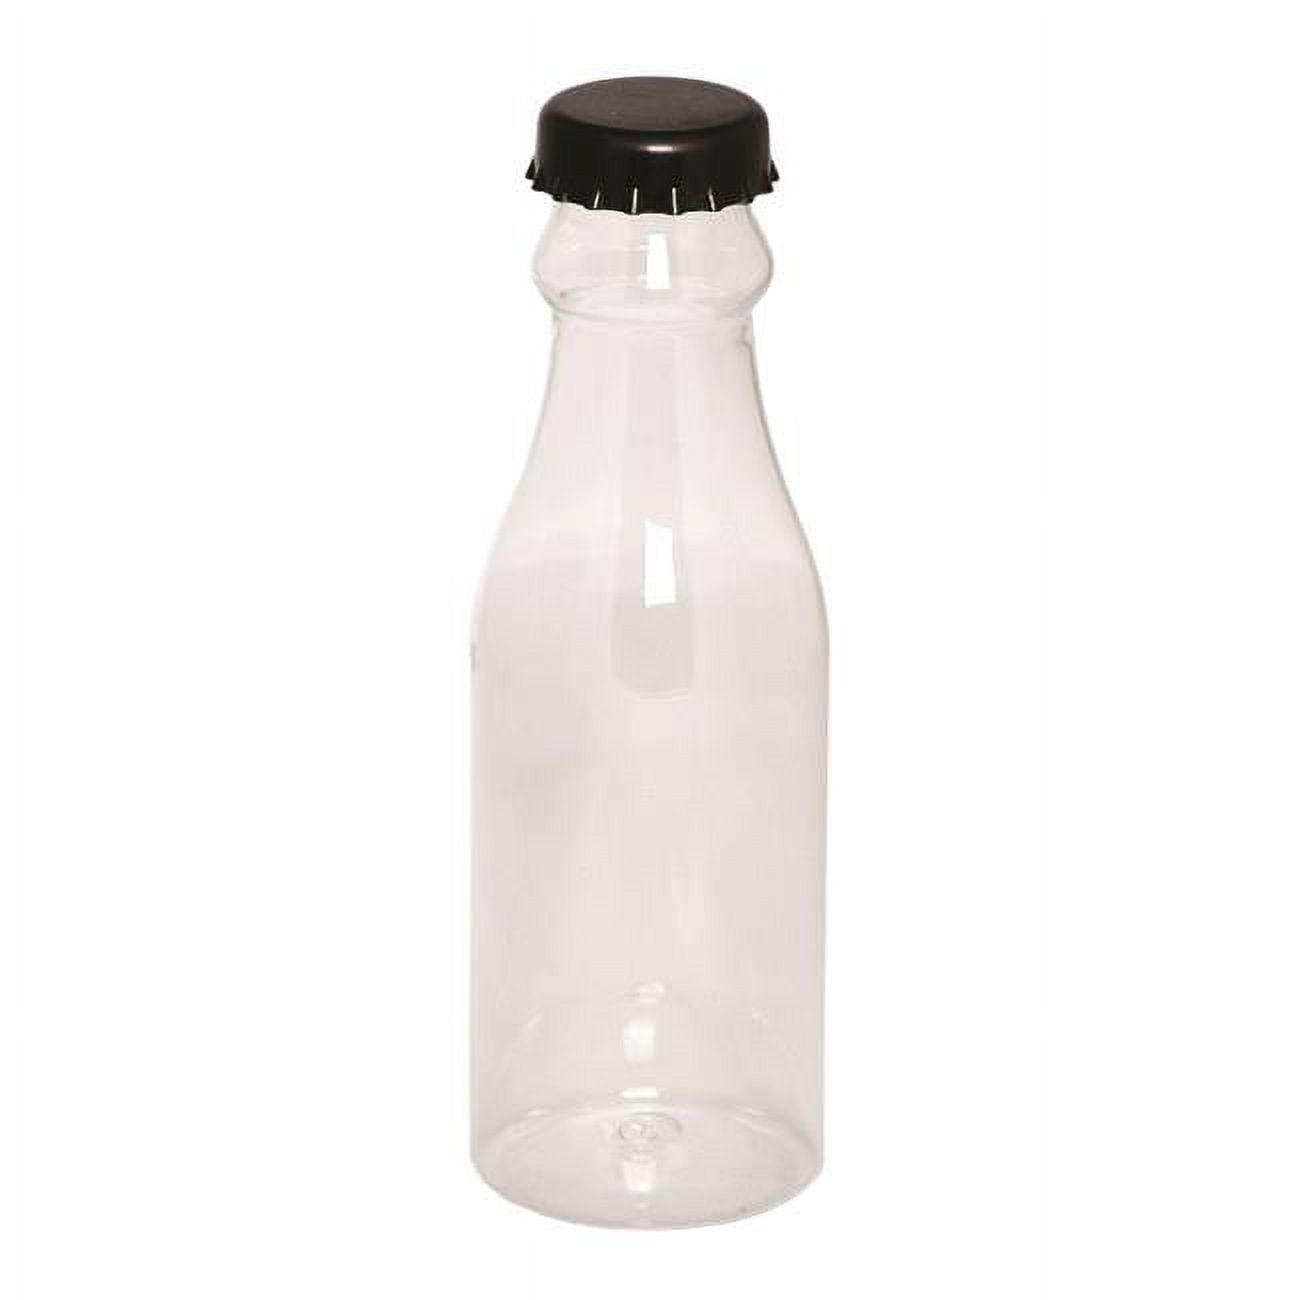 Sunlite 28oz Water Bottle - Frosted Clear